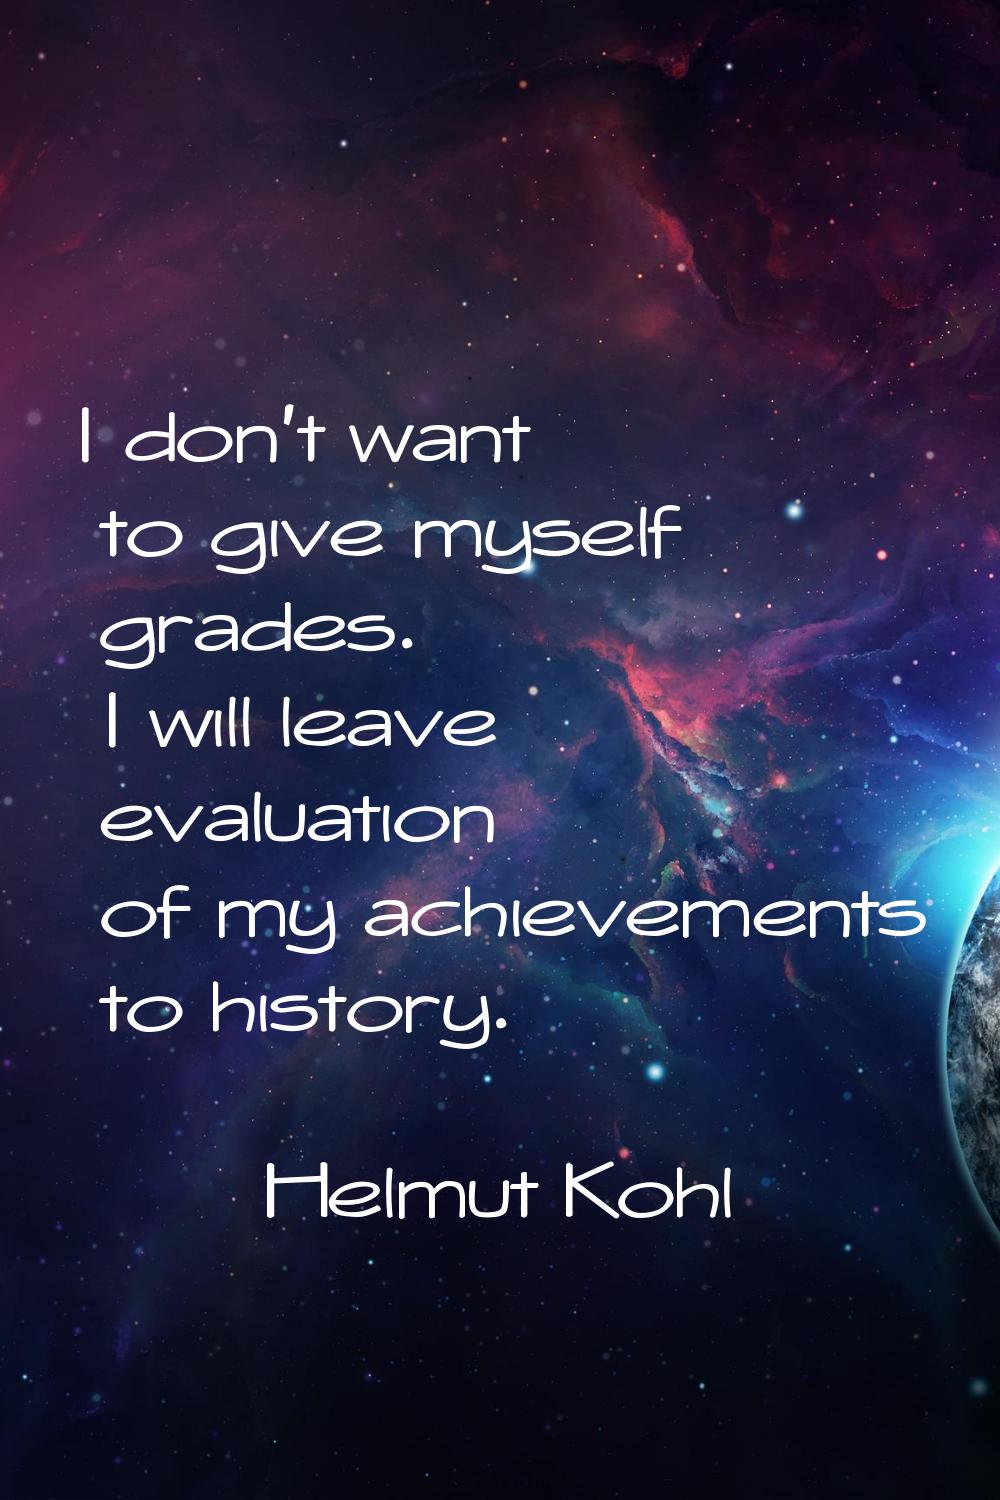 I don't want to give myself grades. I will leave evaluation of my achievements to history.